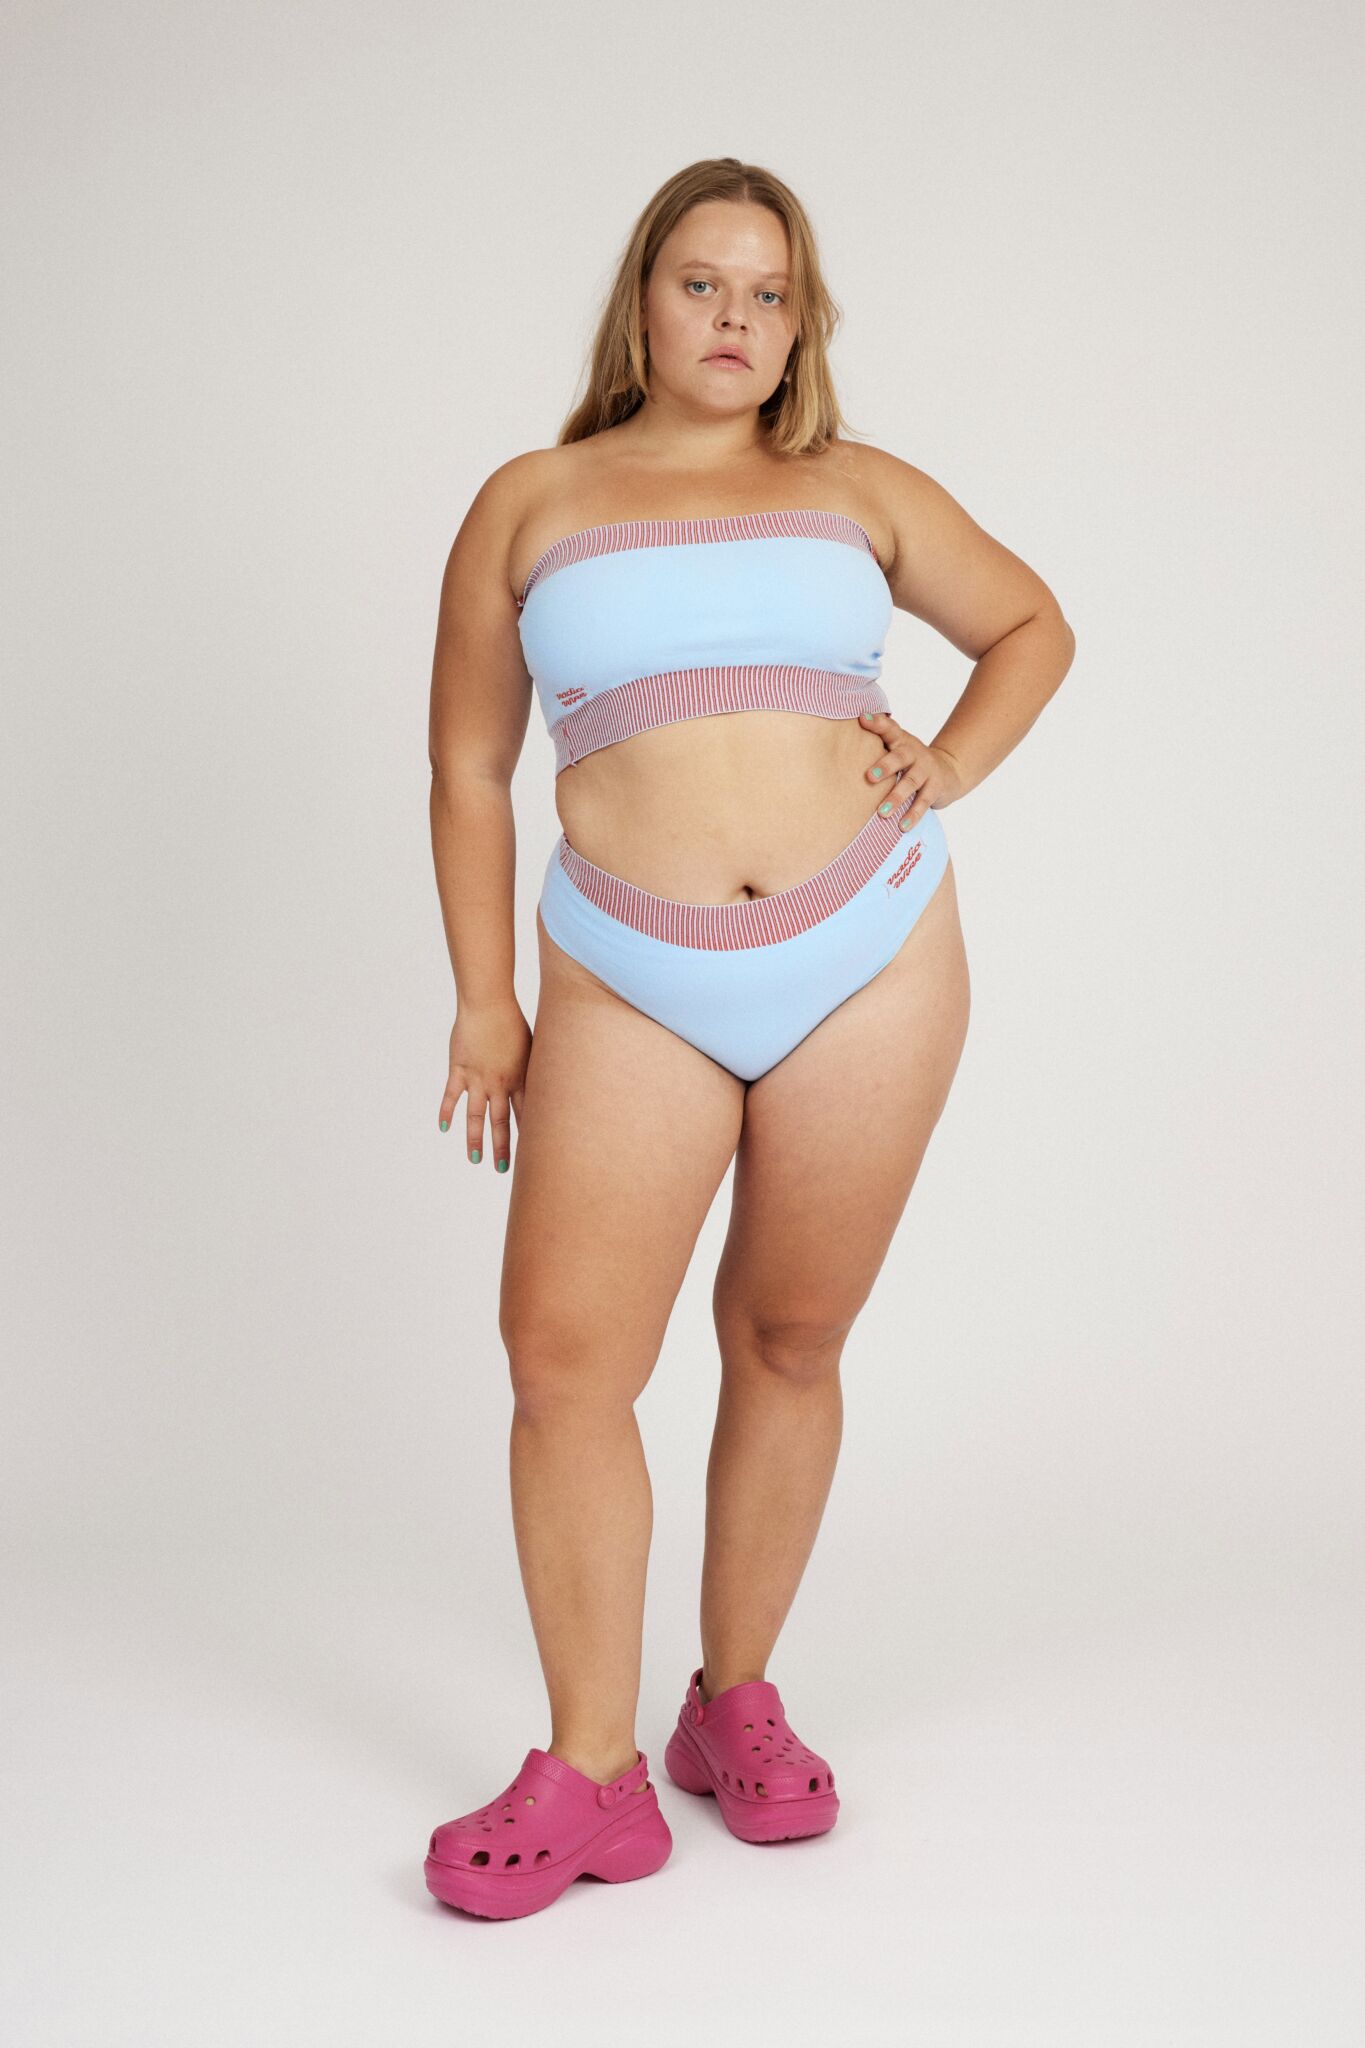 Spring Bloomer Panty in light blue and red are a knitted pair of high-waist pantys with logo and ribbed edges. Knitted in a body fitted, yet flexible material that adapts to the body. Can be mixed and matched with Spring Bloomer Top and be used as swimwear.